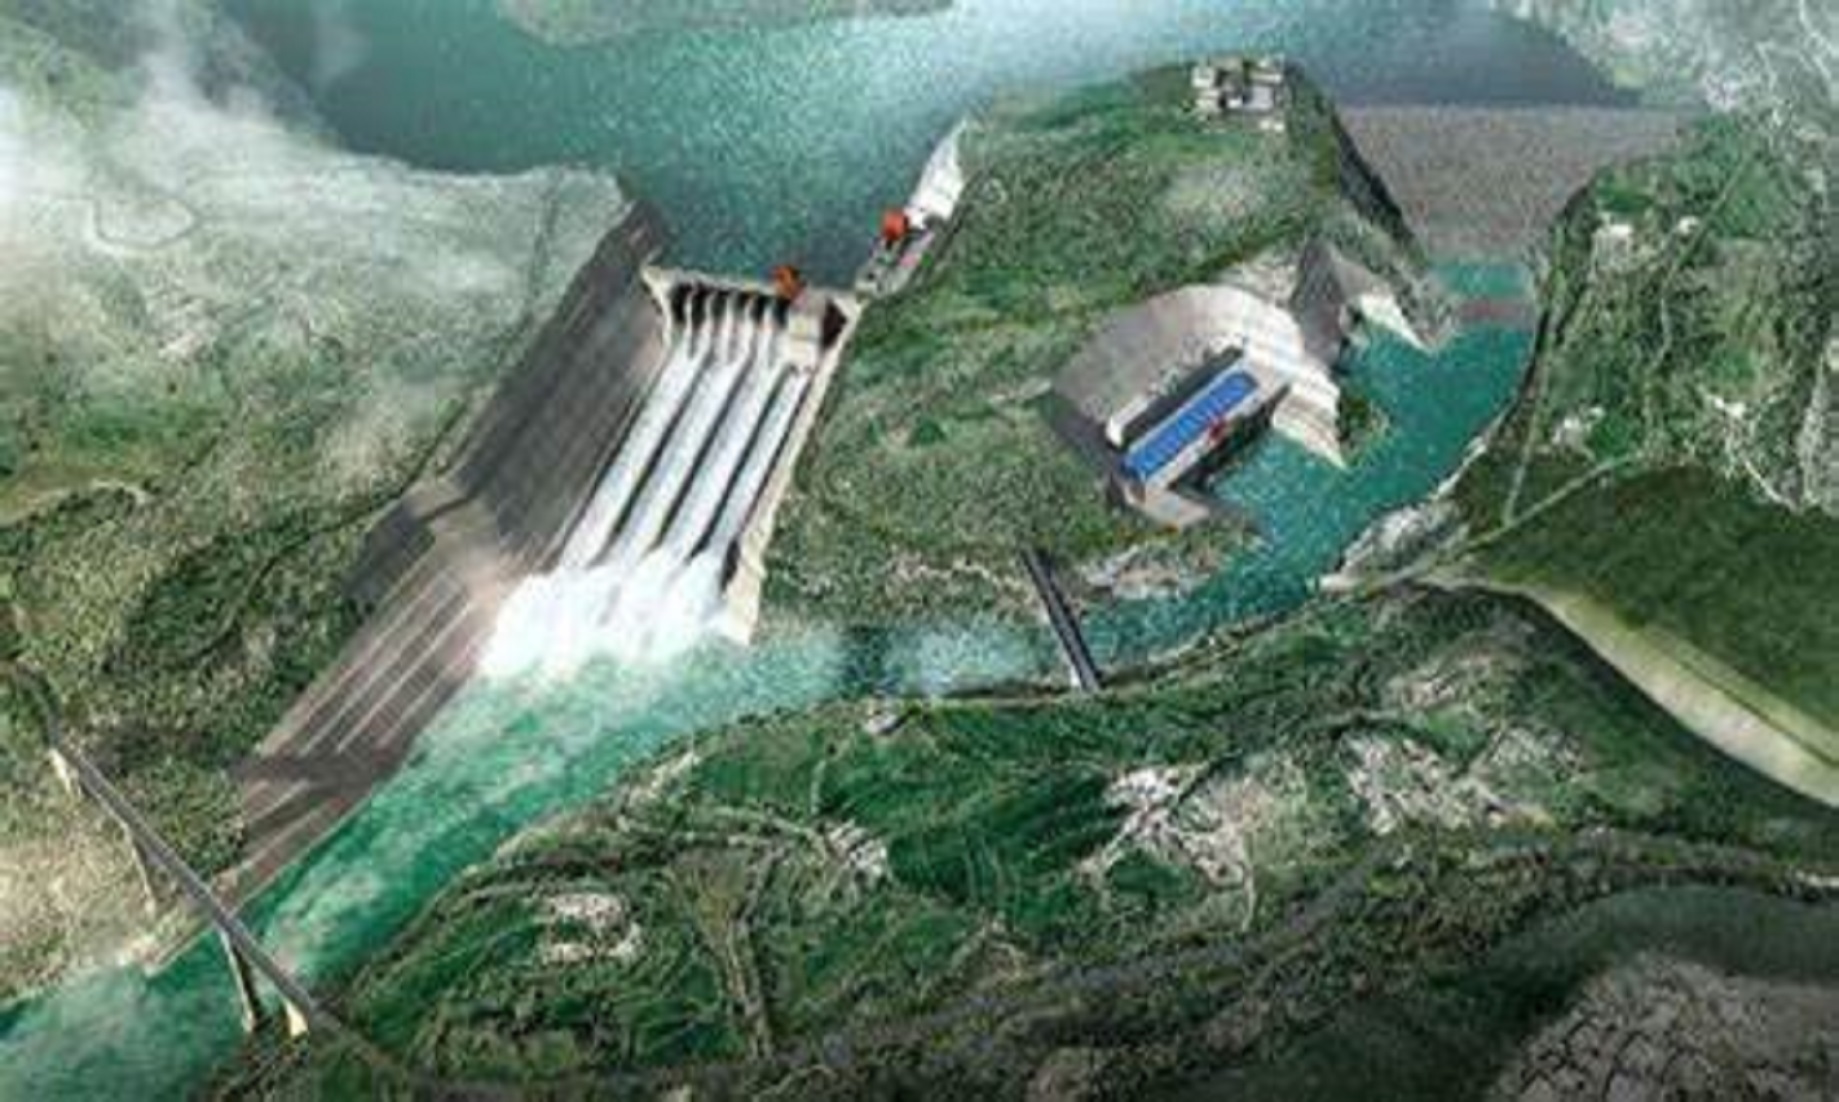 Karot Hydropower Project Manifests Clean, Green Vision Of CPEC: Pakistani Foreign Ministry